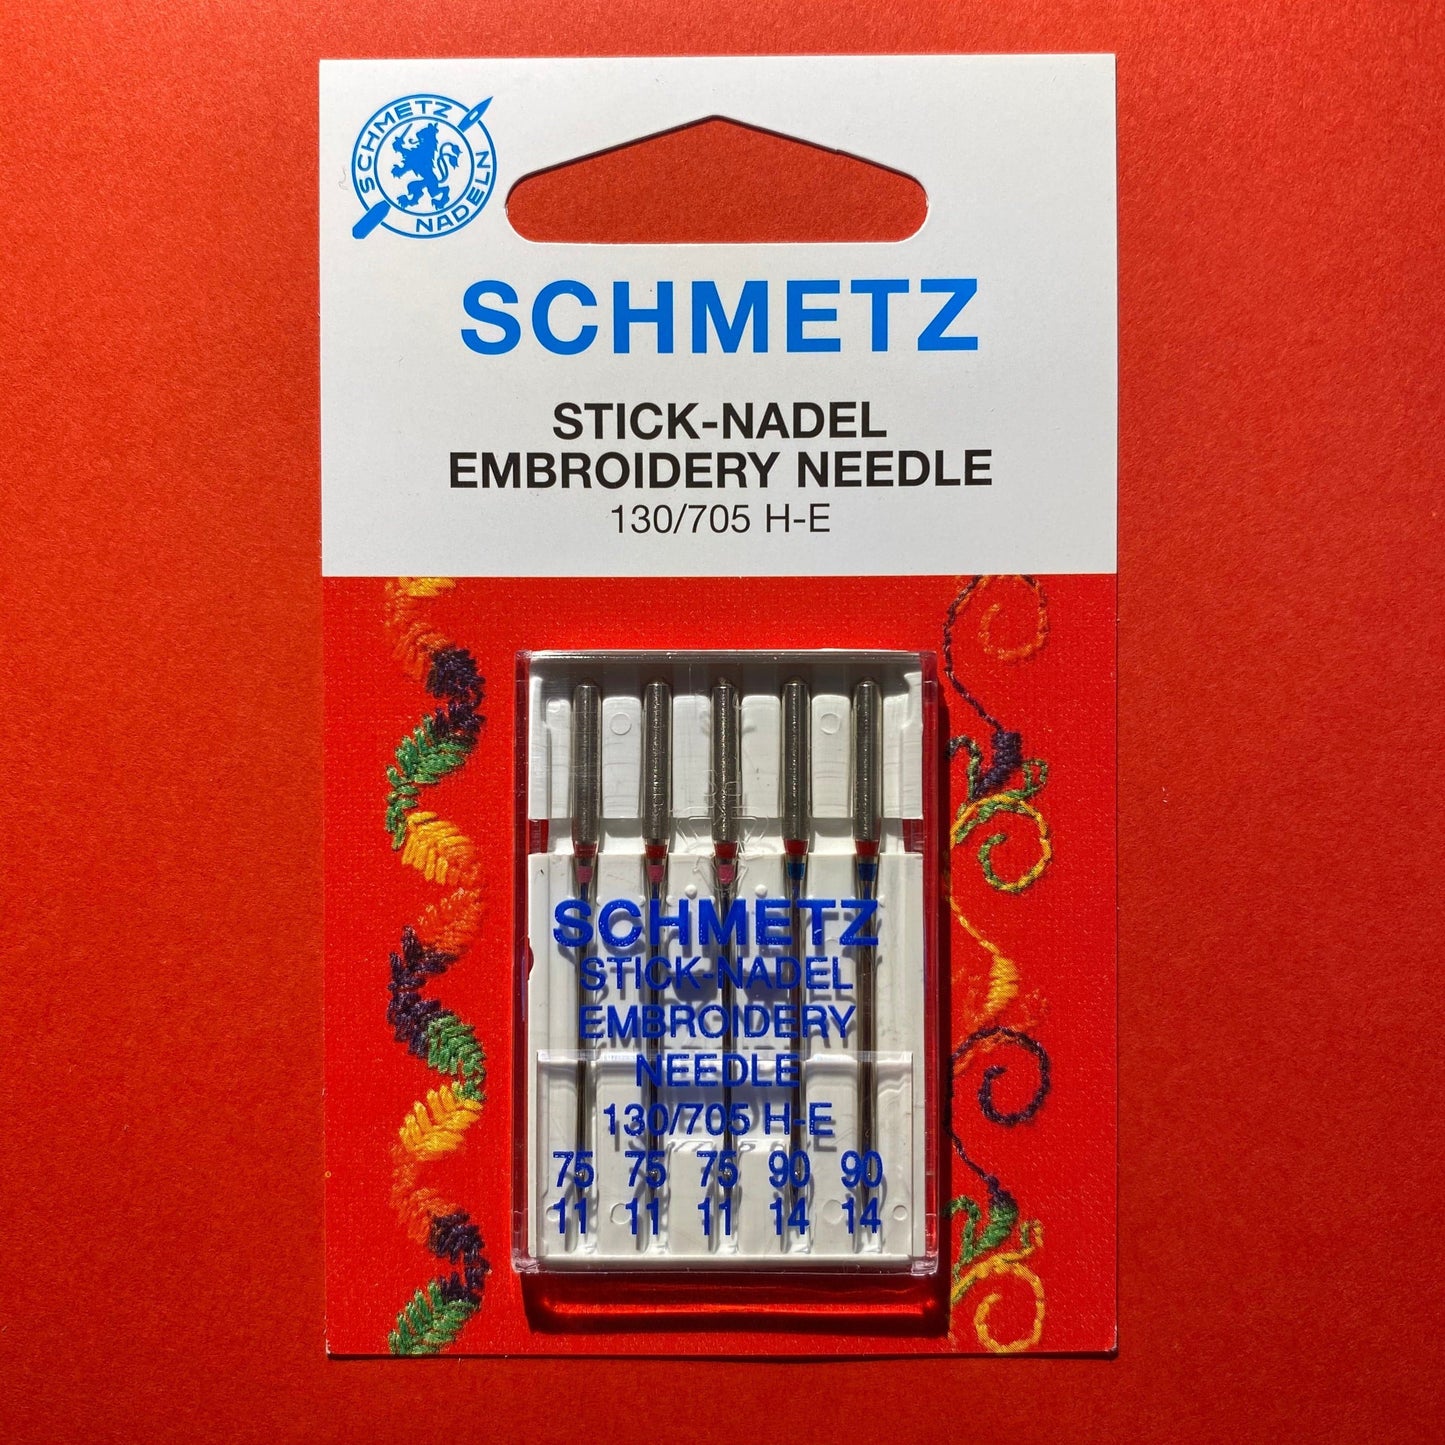 Embroidery Machine Starter Bundle - Embroidery Thread 40 colour x 500m set, Embroidery backing / stabiliser 25cm x 50y Roll, Embroidery scissor set and needles